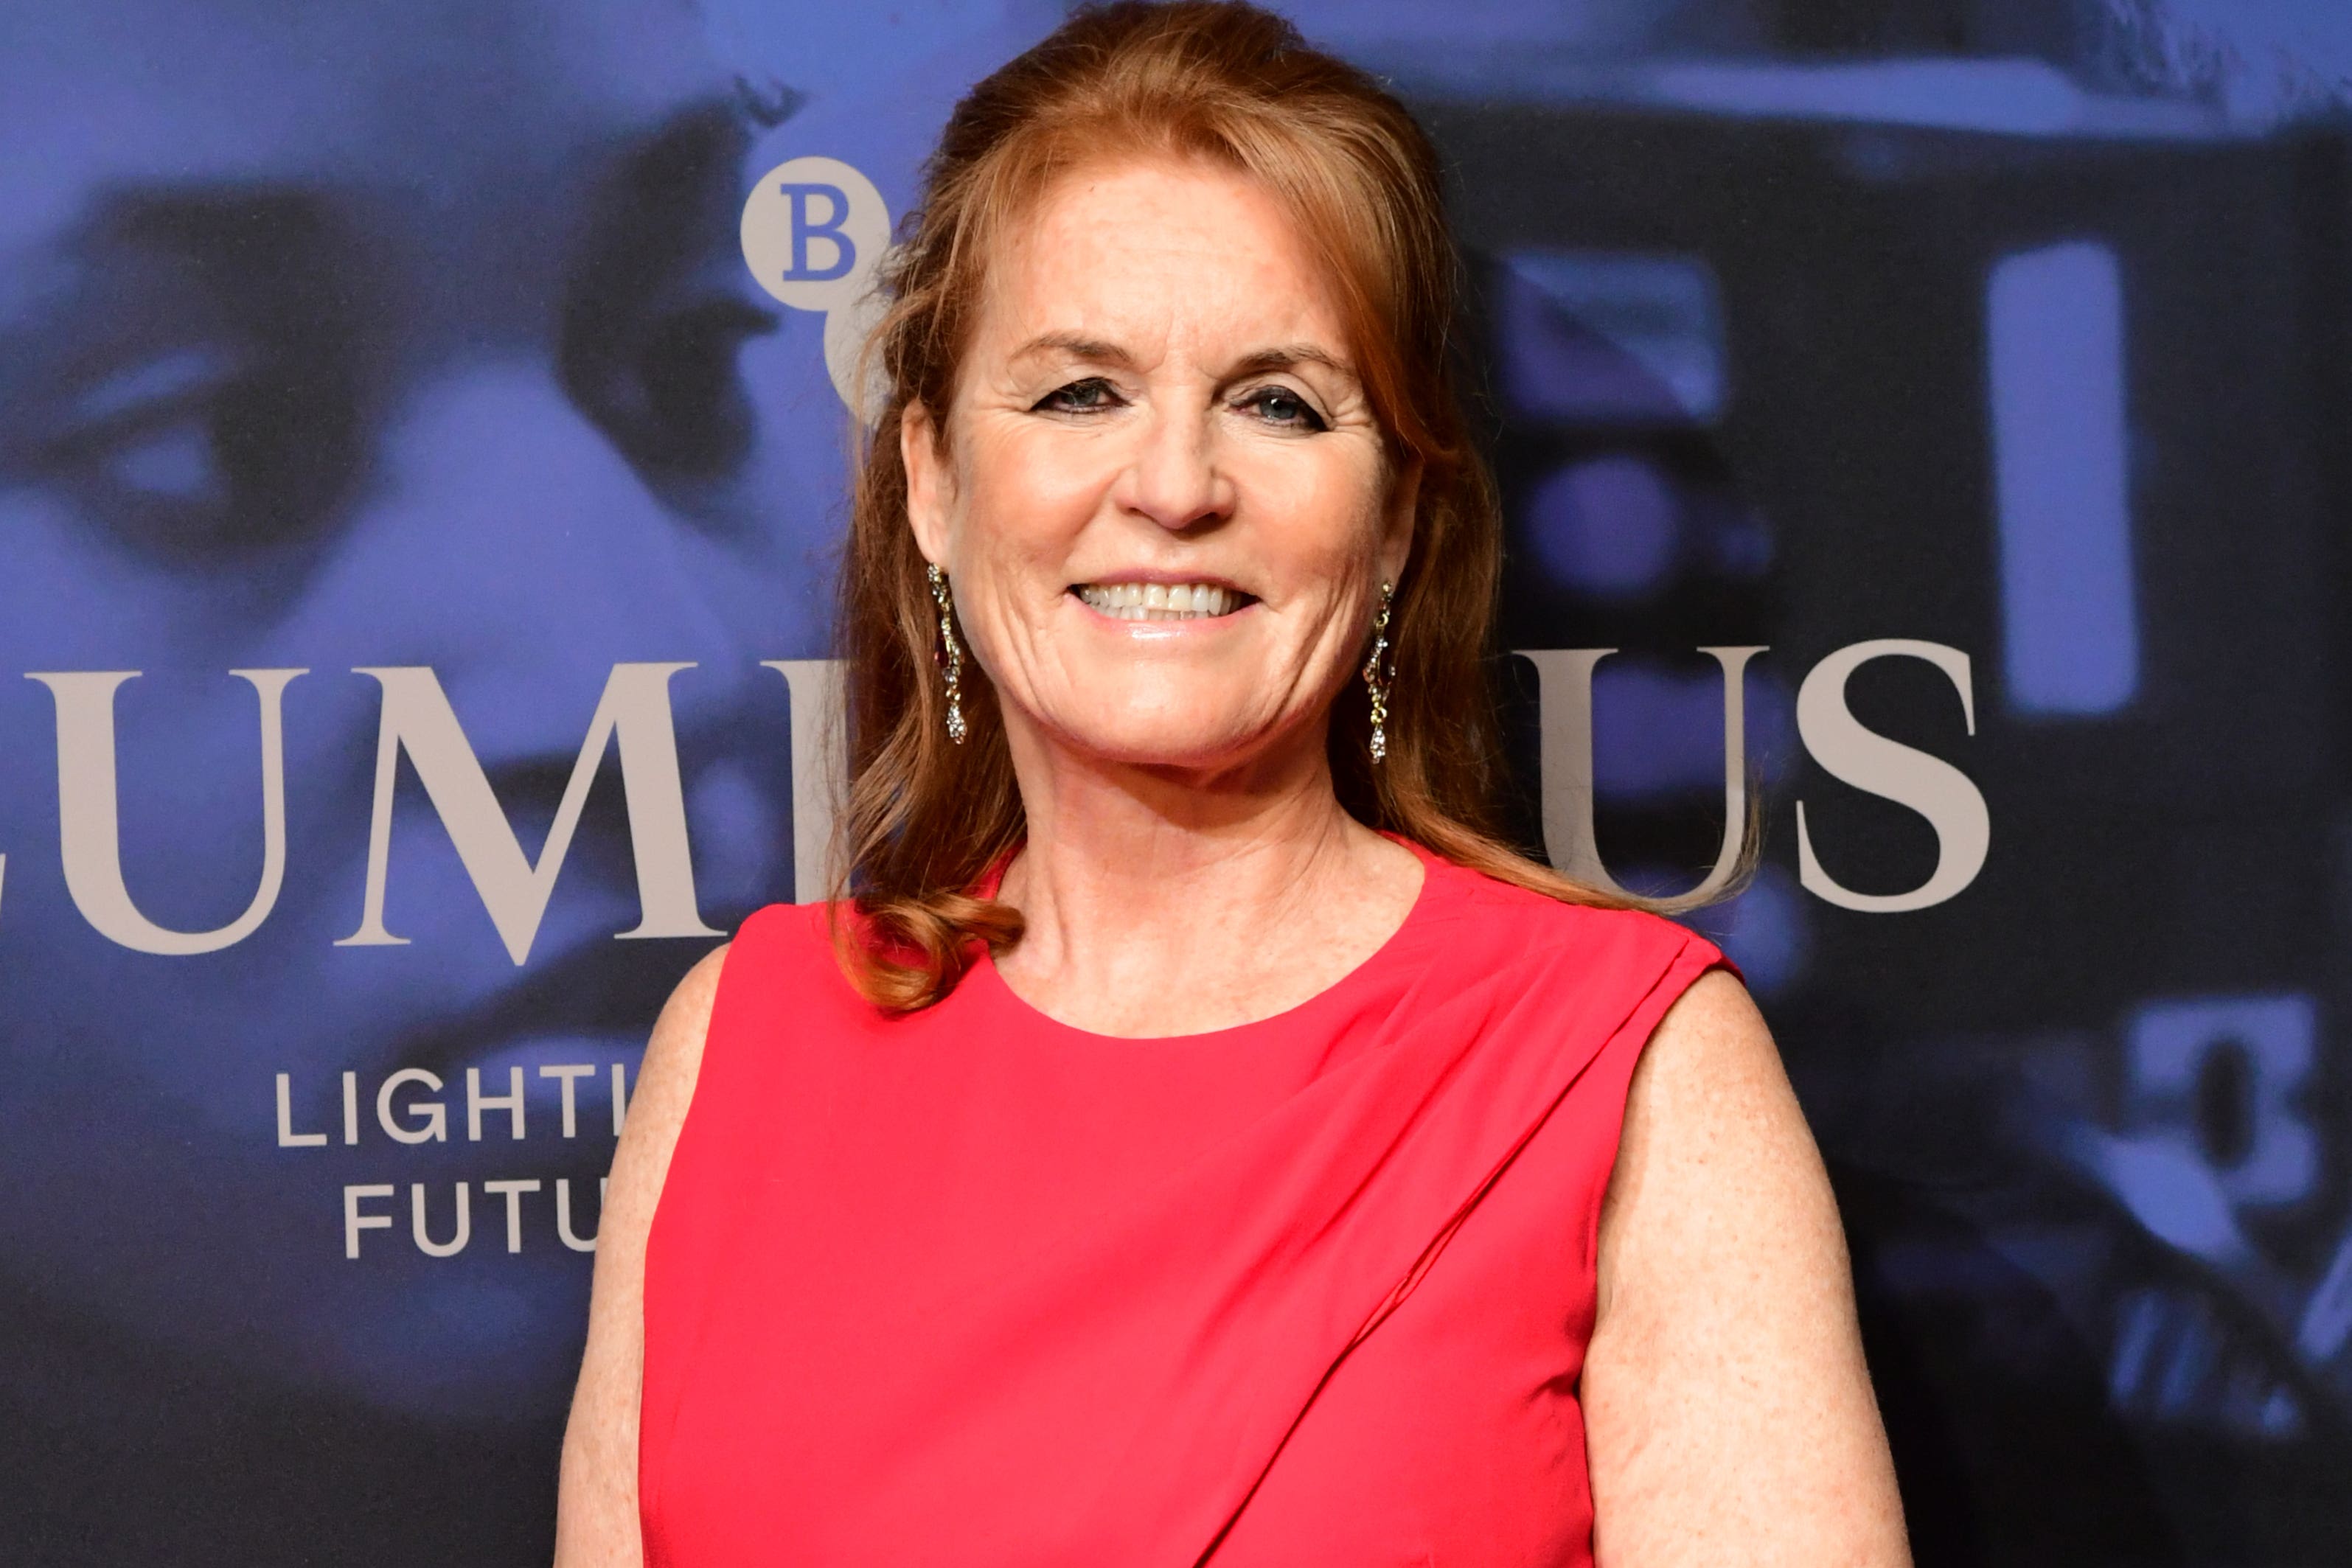 Sarah Ferguson said that she’d come to ‘like herself’ after surgery